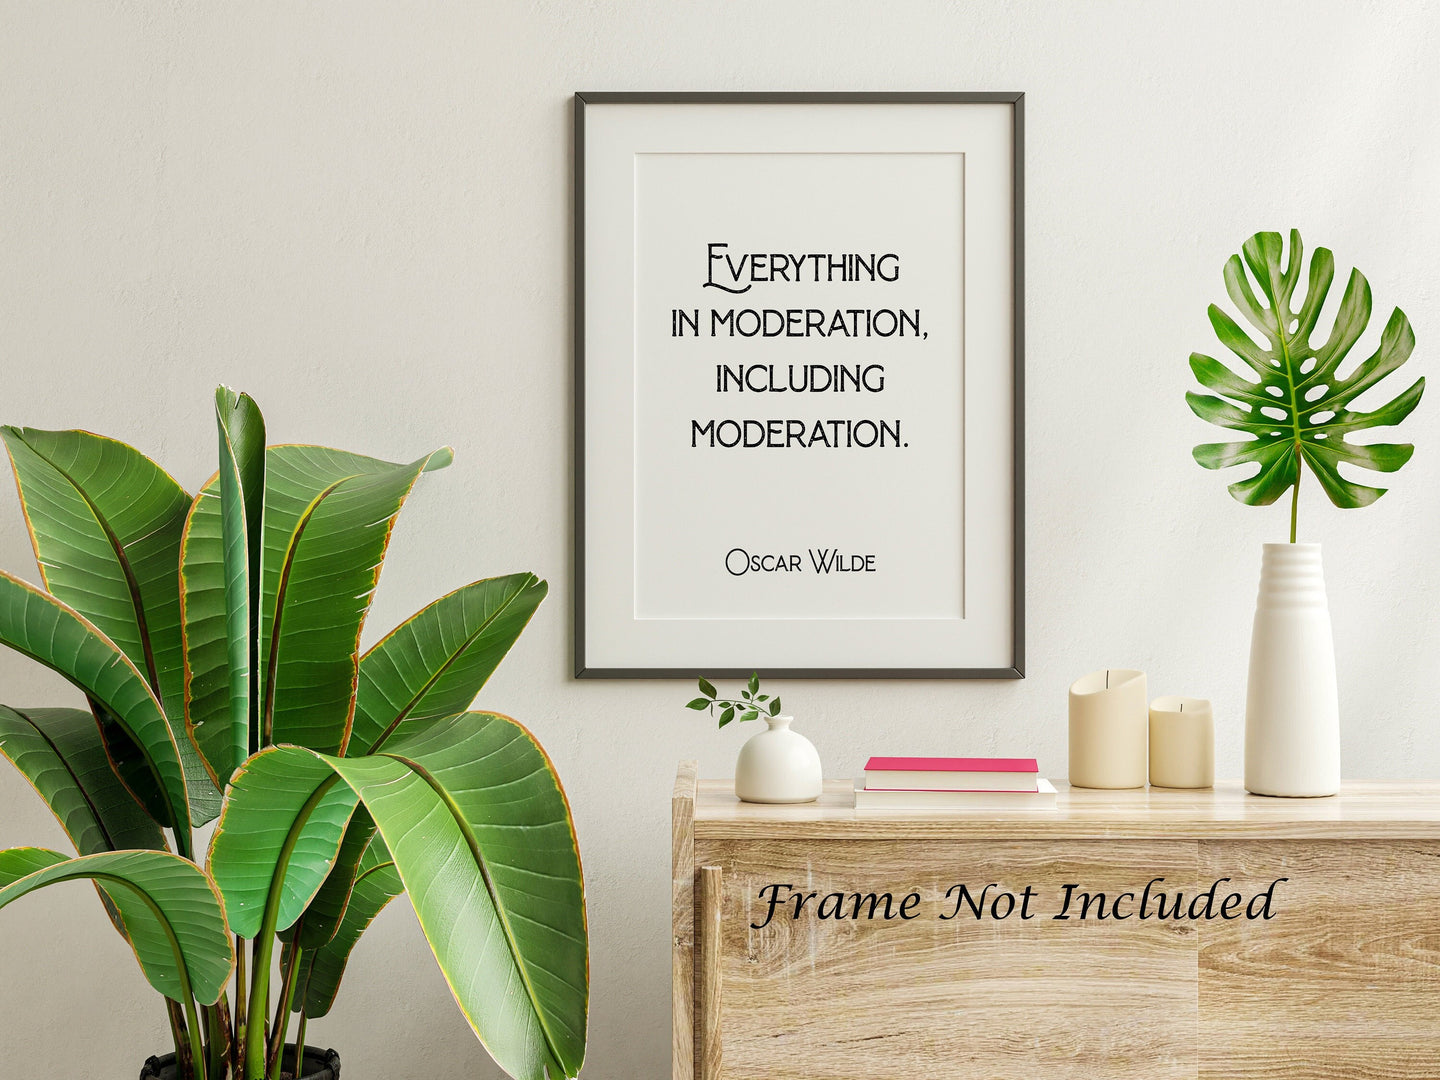 Oscar Wilde Quote Print - Everything in moderation, including moderation - Physical Print Without Frame